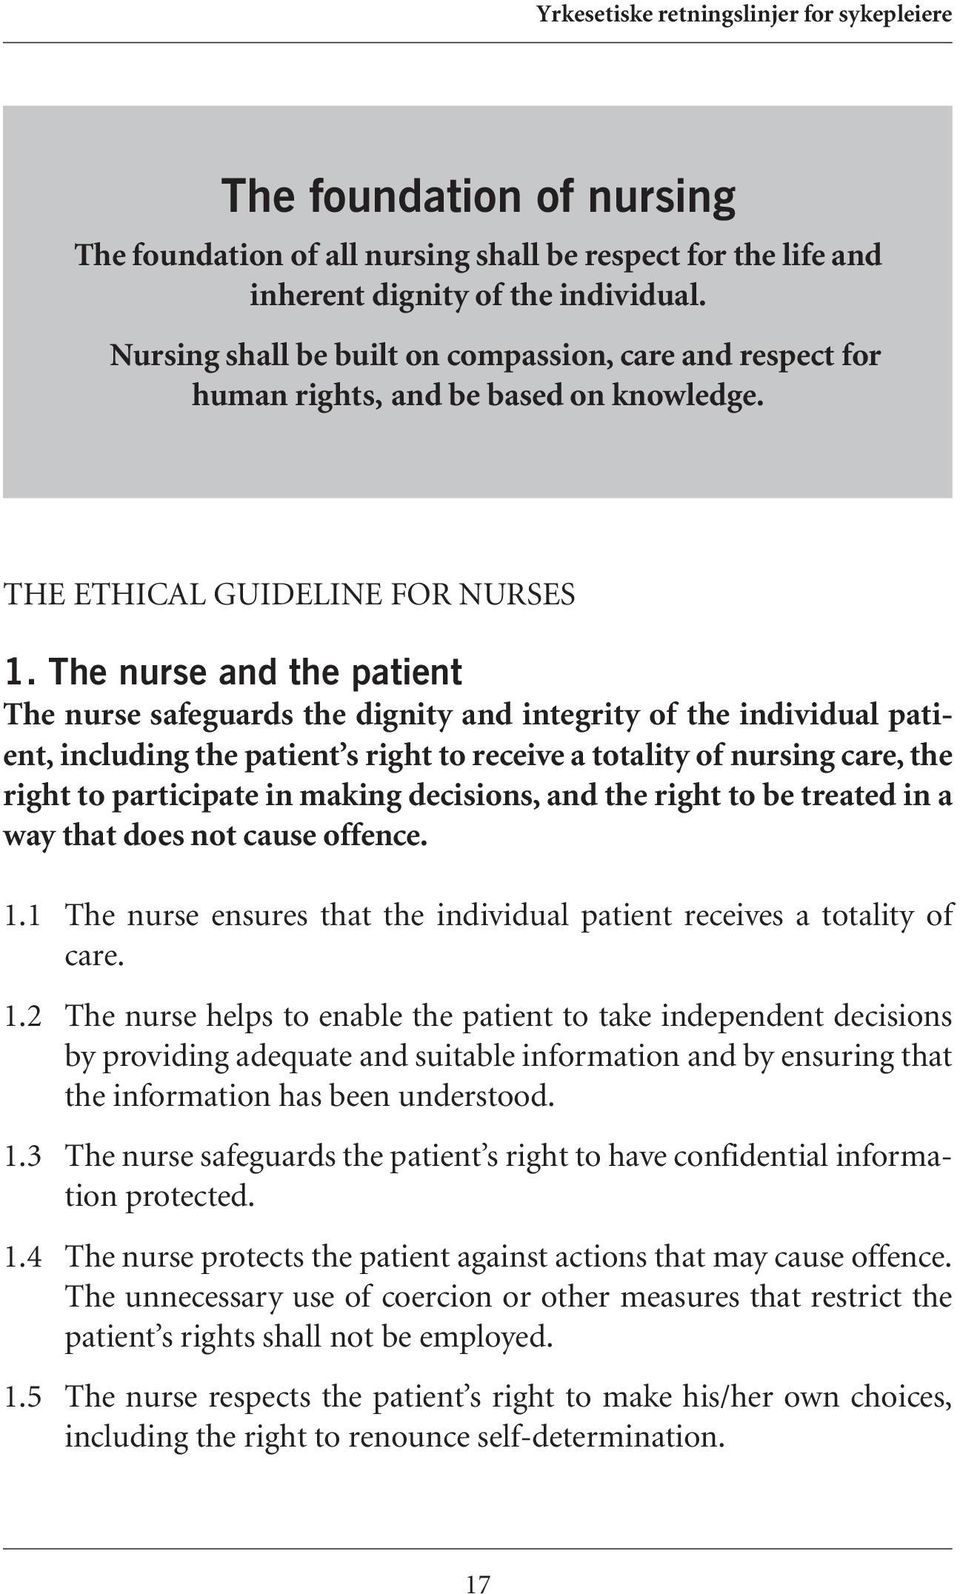 The nurse and the patient The nurse safeguards the dignity and integrity of the individual patient, including the patient s right to receive a totality of nursing care, the right to participate in